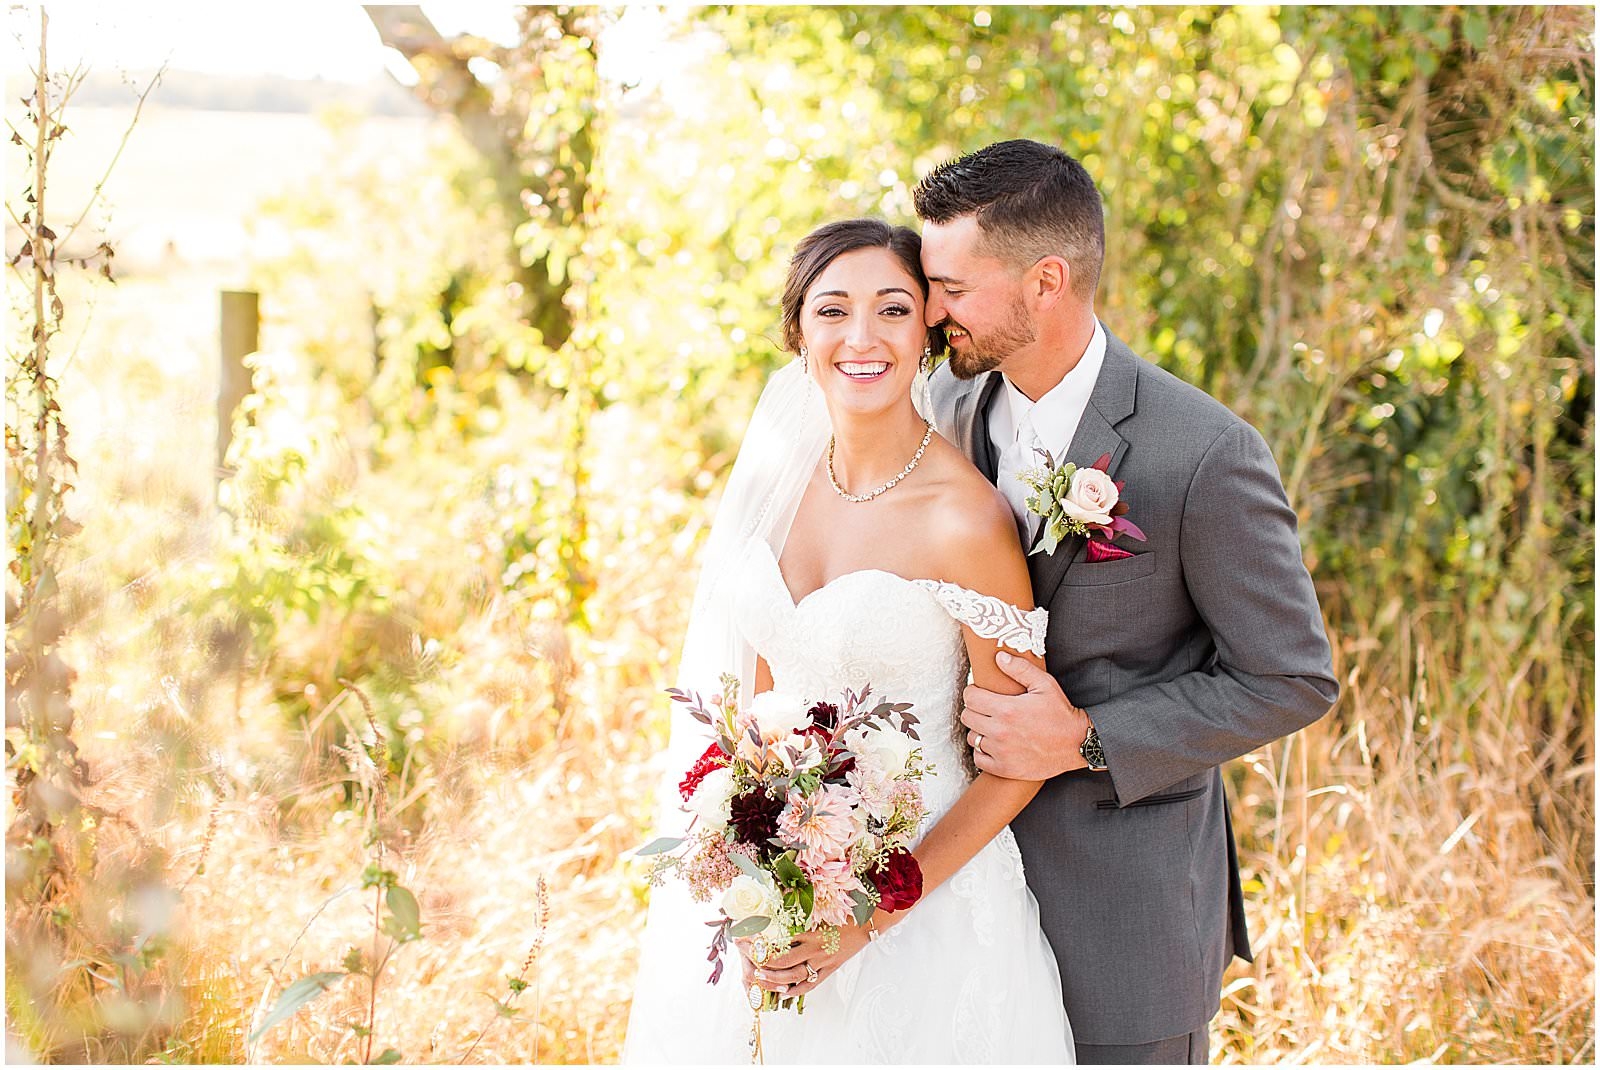 A Stunning Fall Wedding in Indianapolis, IN |. Sally and Andrew | Bret and Brandie Photography 0119.jpg